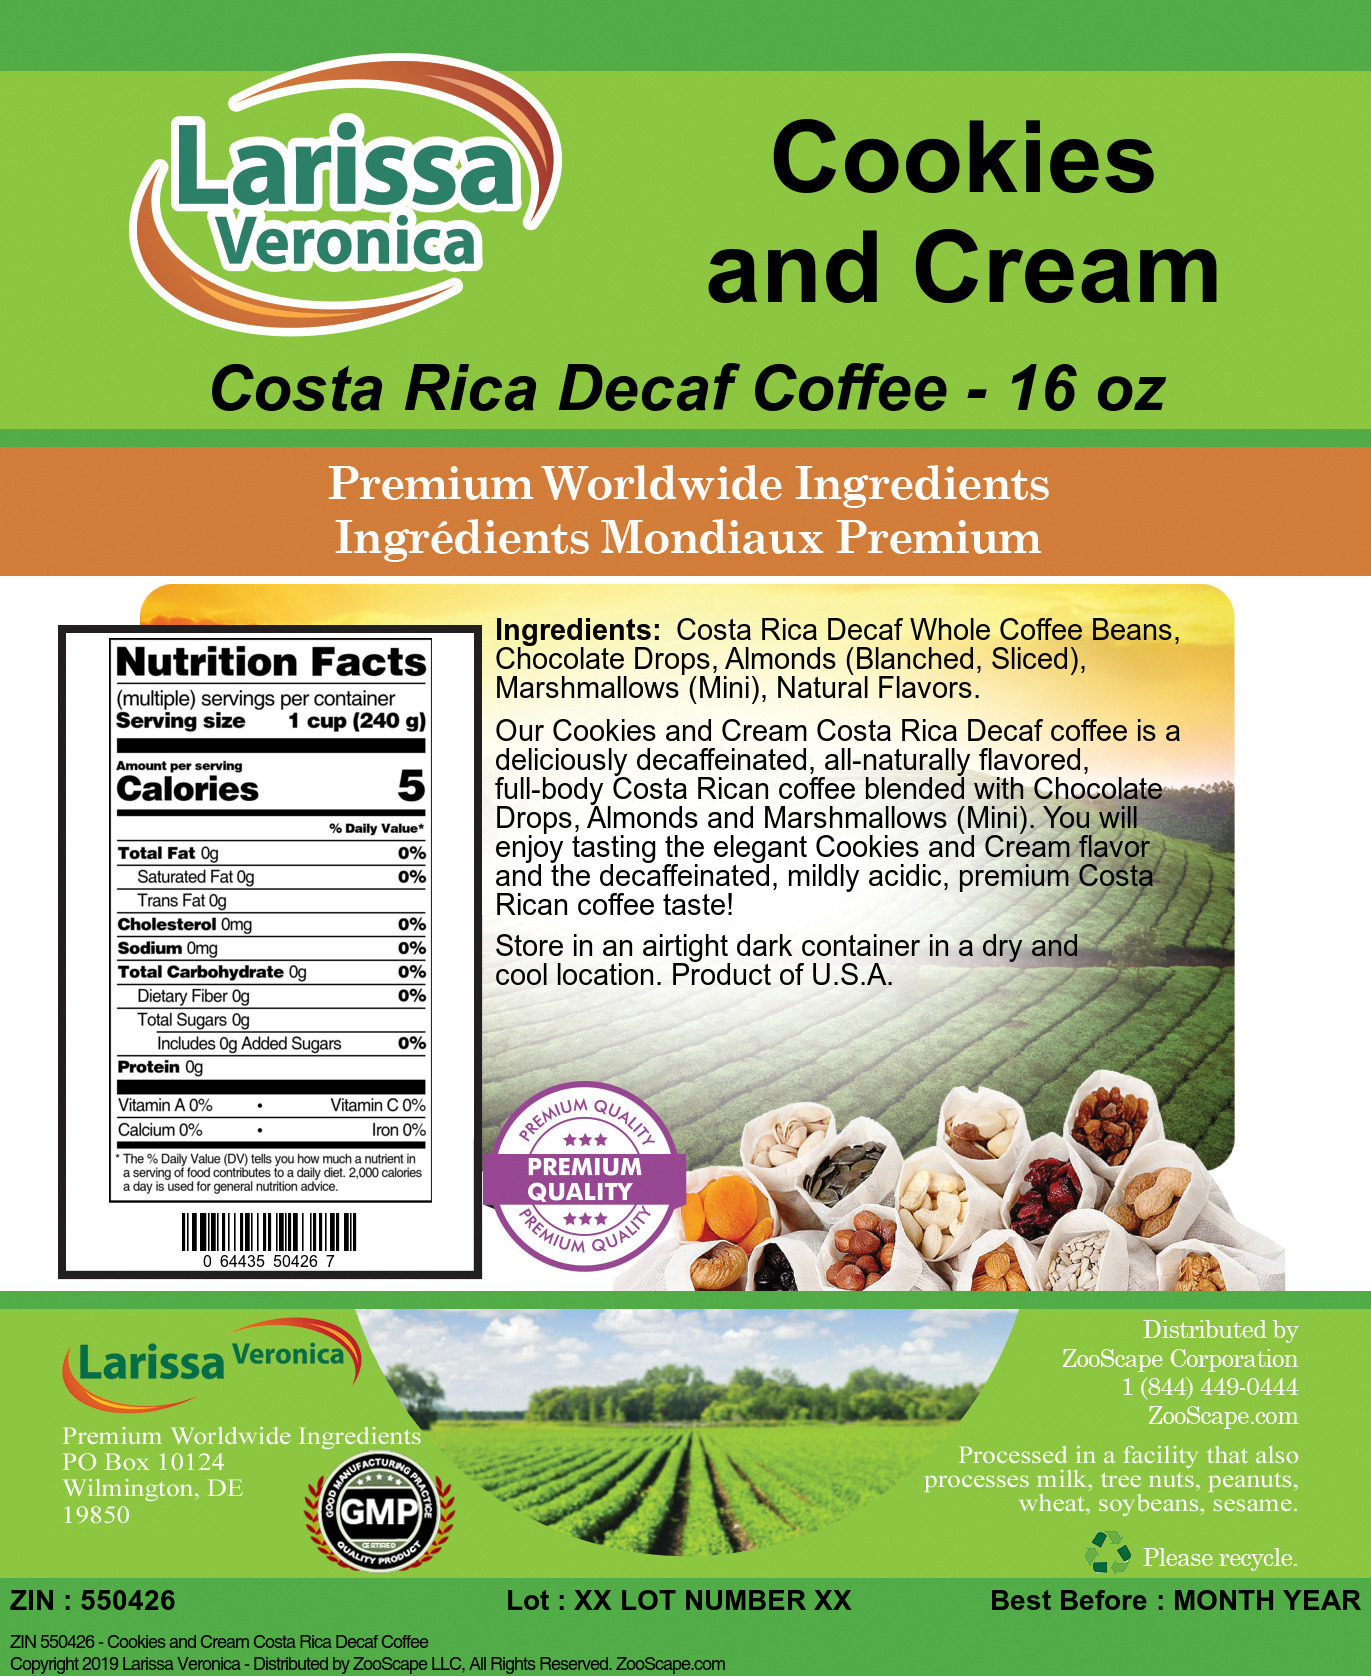 Cookies and Cream Costa Rica Decaf Coffee - Label